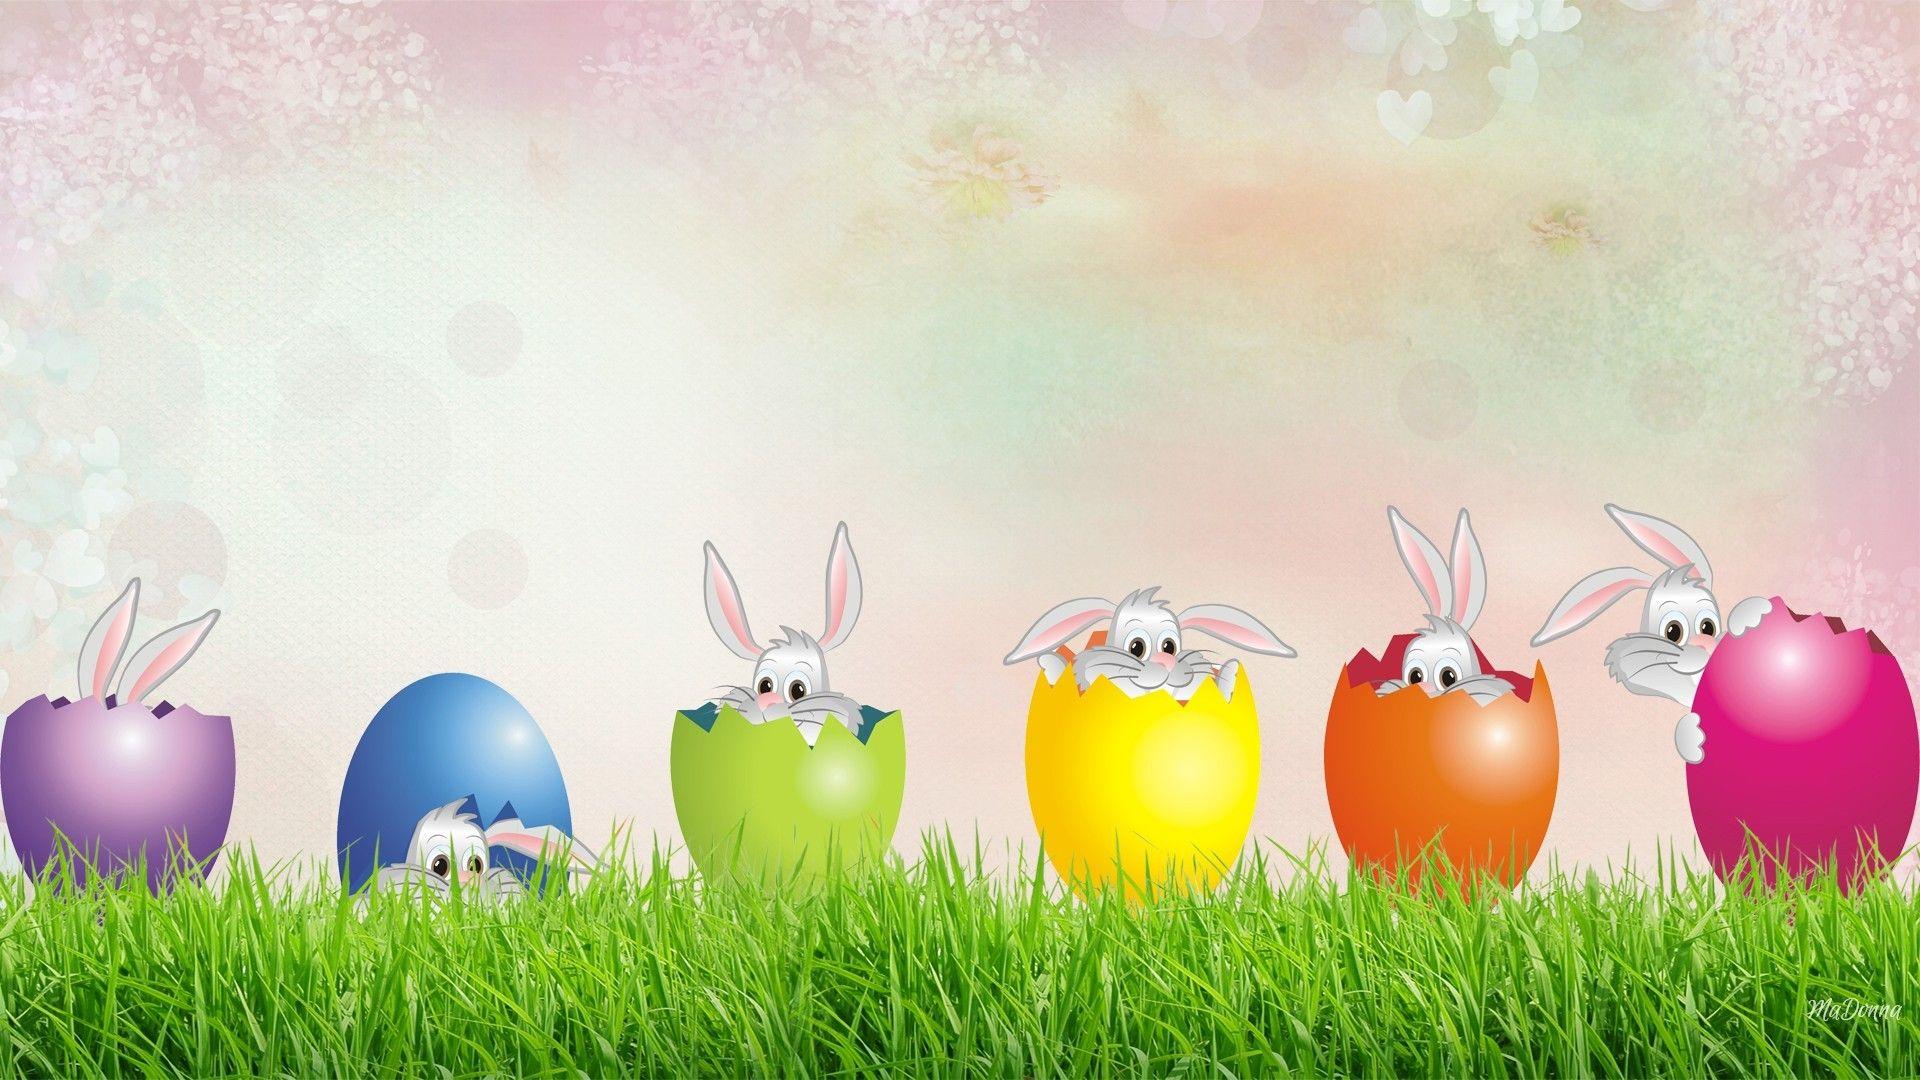 Misc: Bunny Eggs Grass Whimsical Spring Easter Rabbit Cute Free